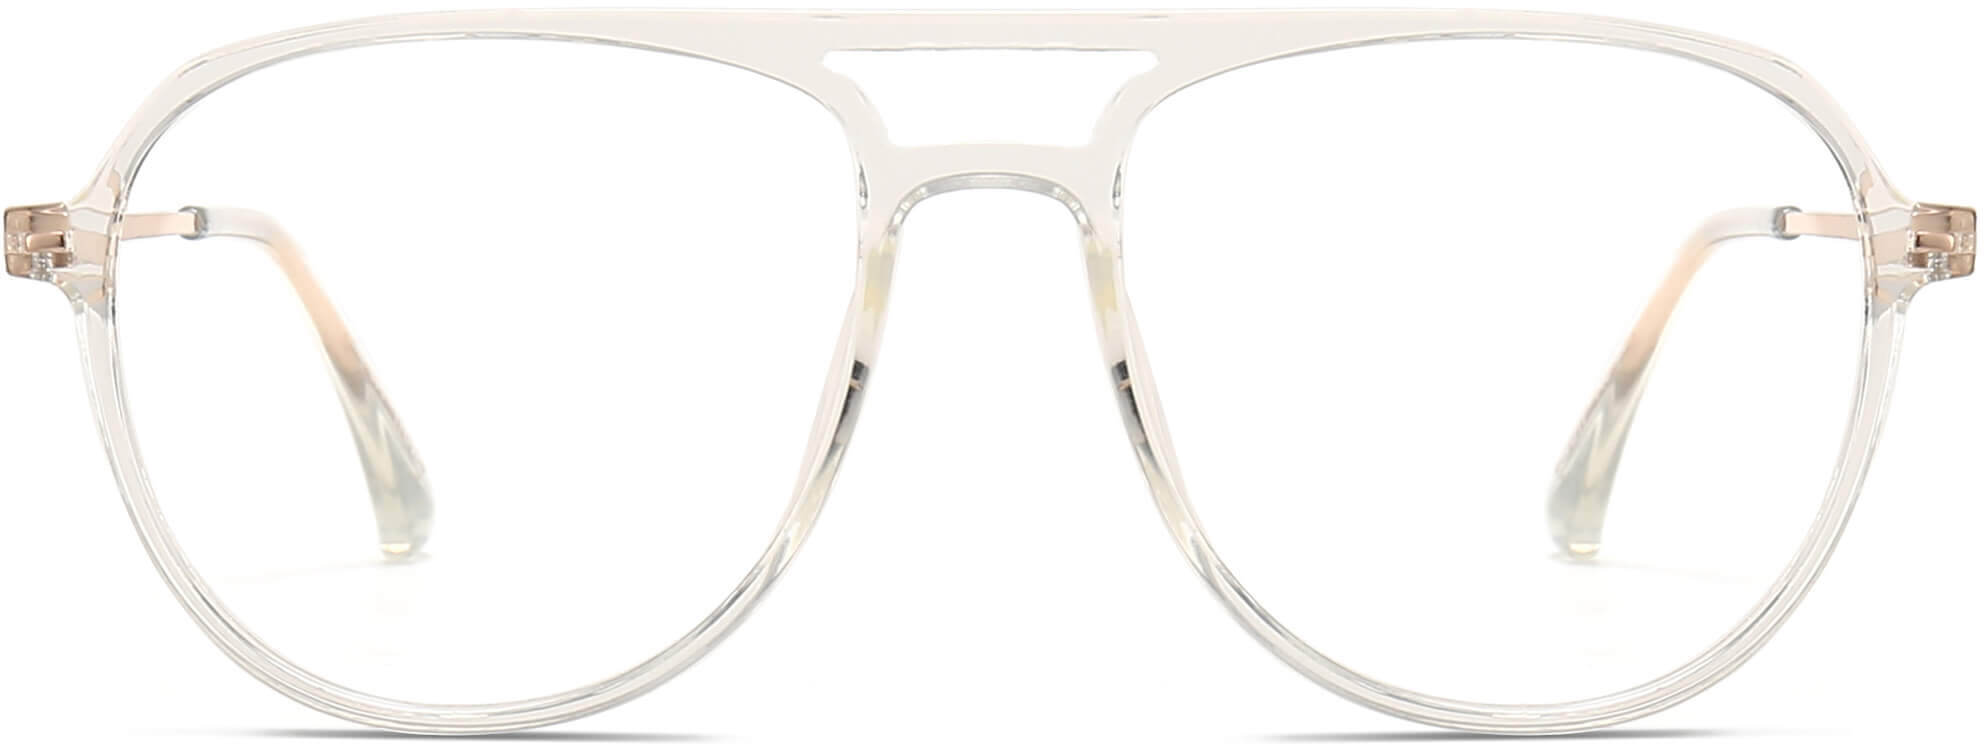 Brynlee Aviator Clear Eyeglasses from ANRRI, front view